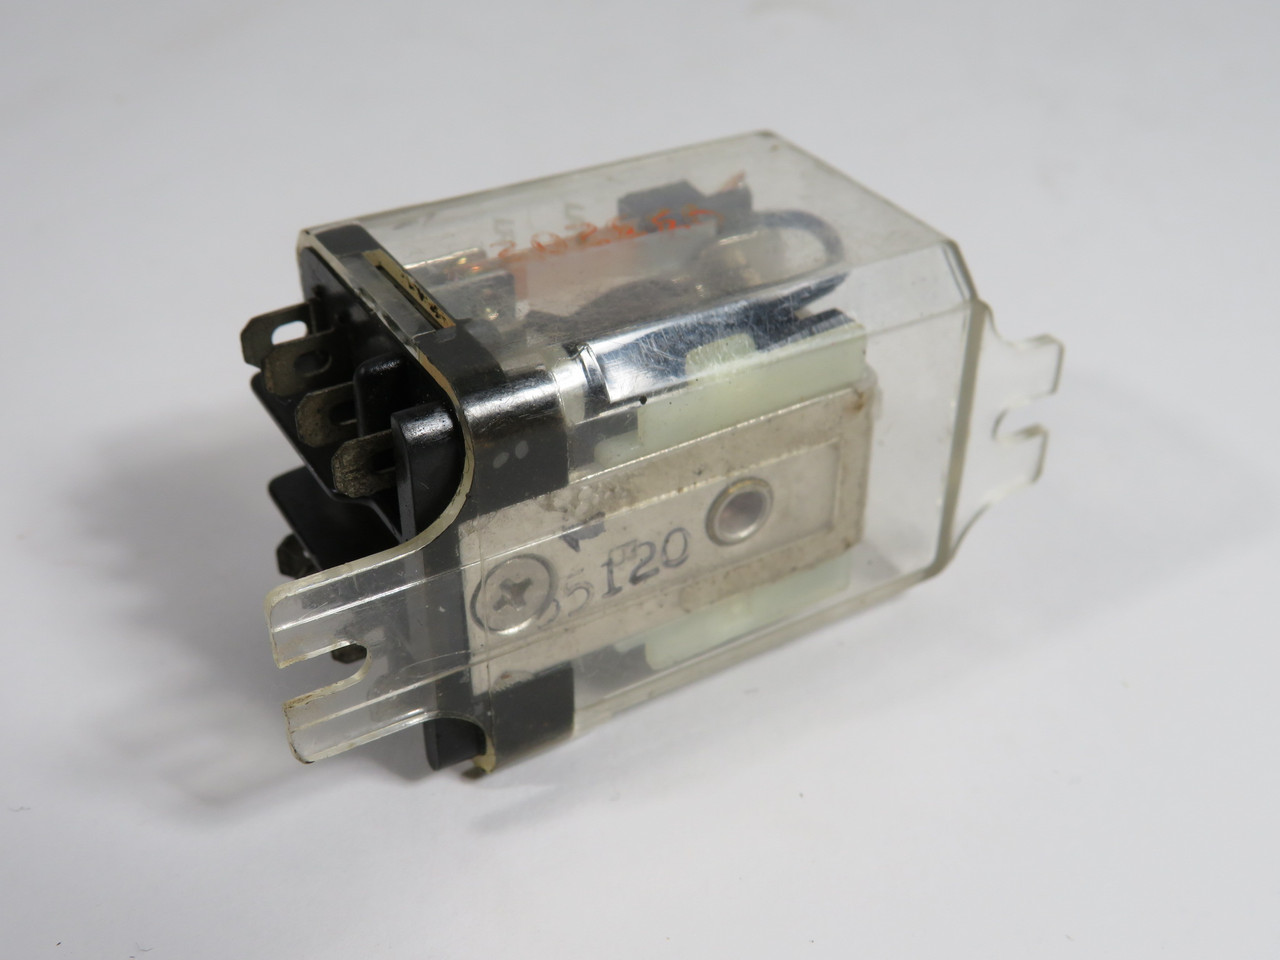 Potter & Brumfield KUP-11A55-120 Plug-In Relay 120V 10A 8-Blade 600V@3A USED